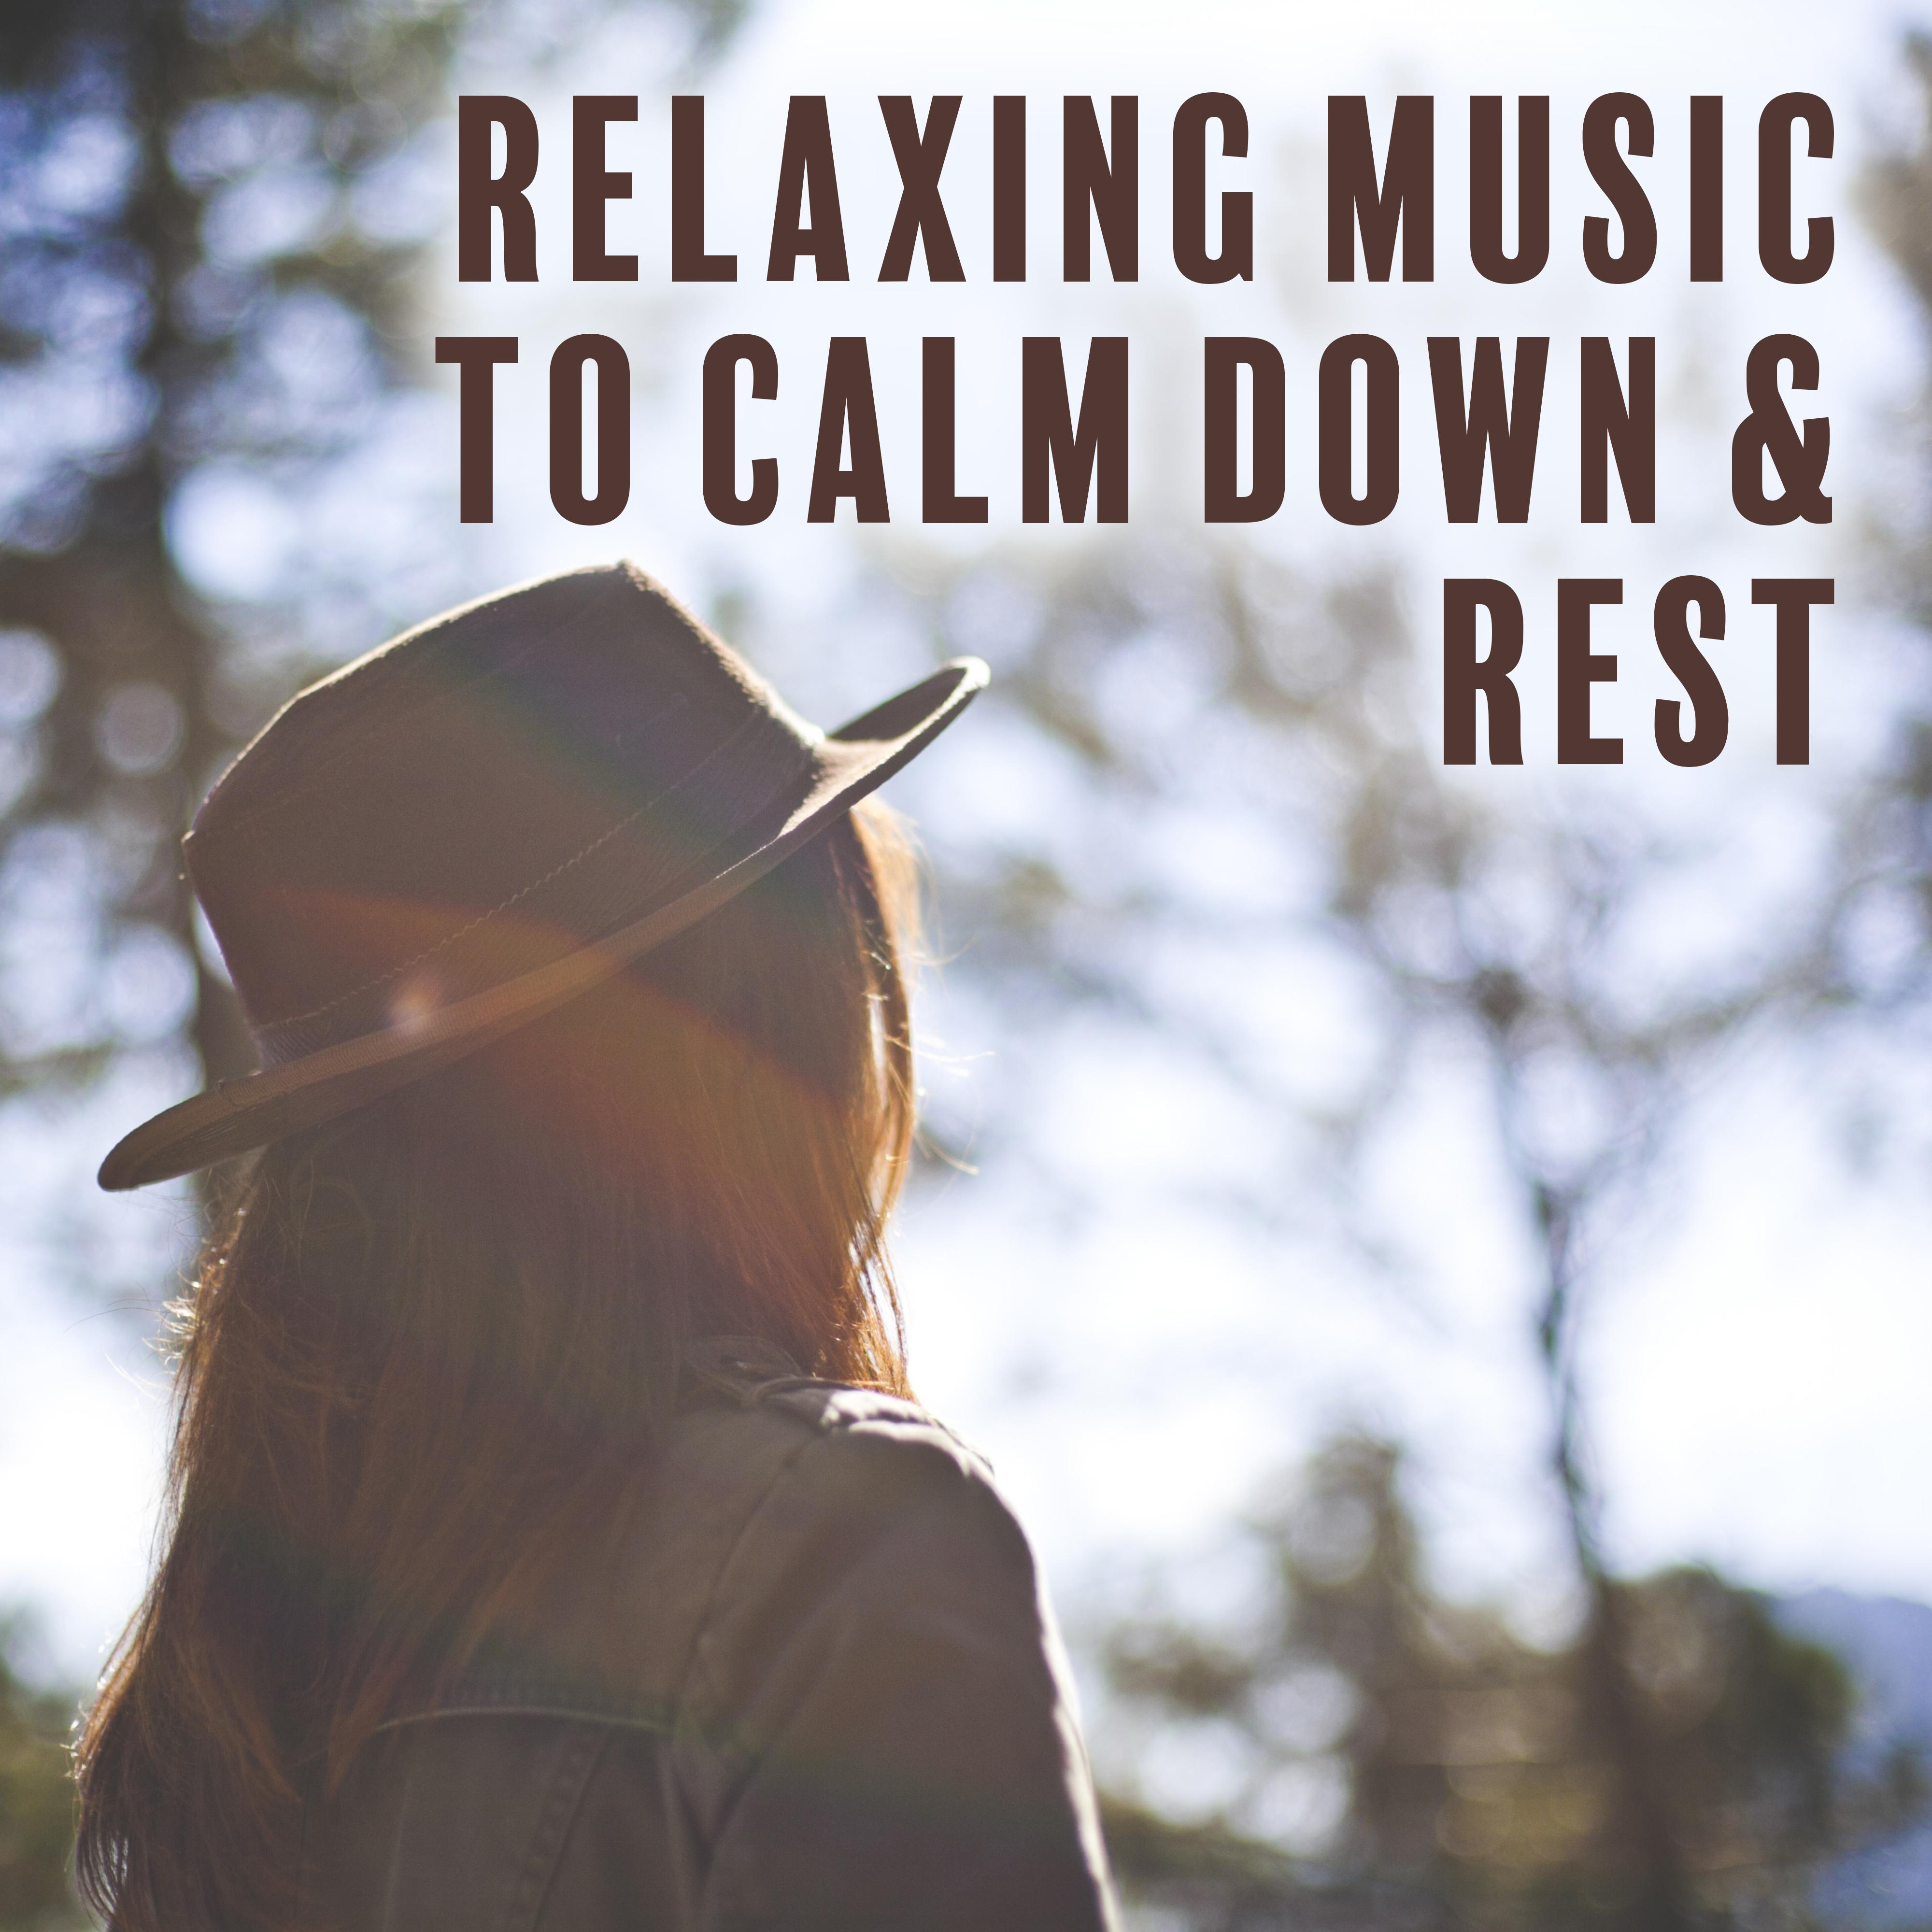 Relaxing Music to Calm Down  Rest  Soft Nature Sounds, Inner Peace, Mind Calmness, New Age Relaxation, Easy Listening